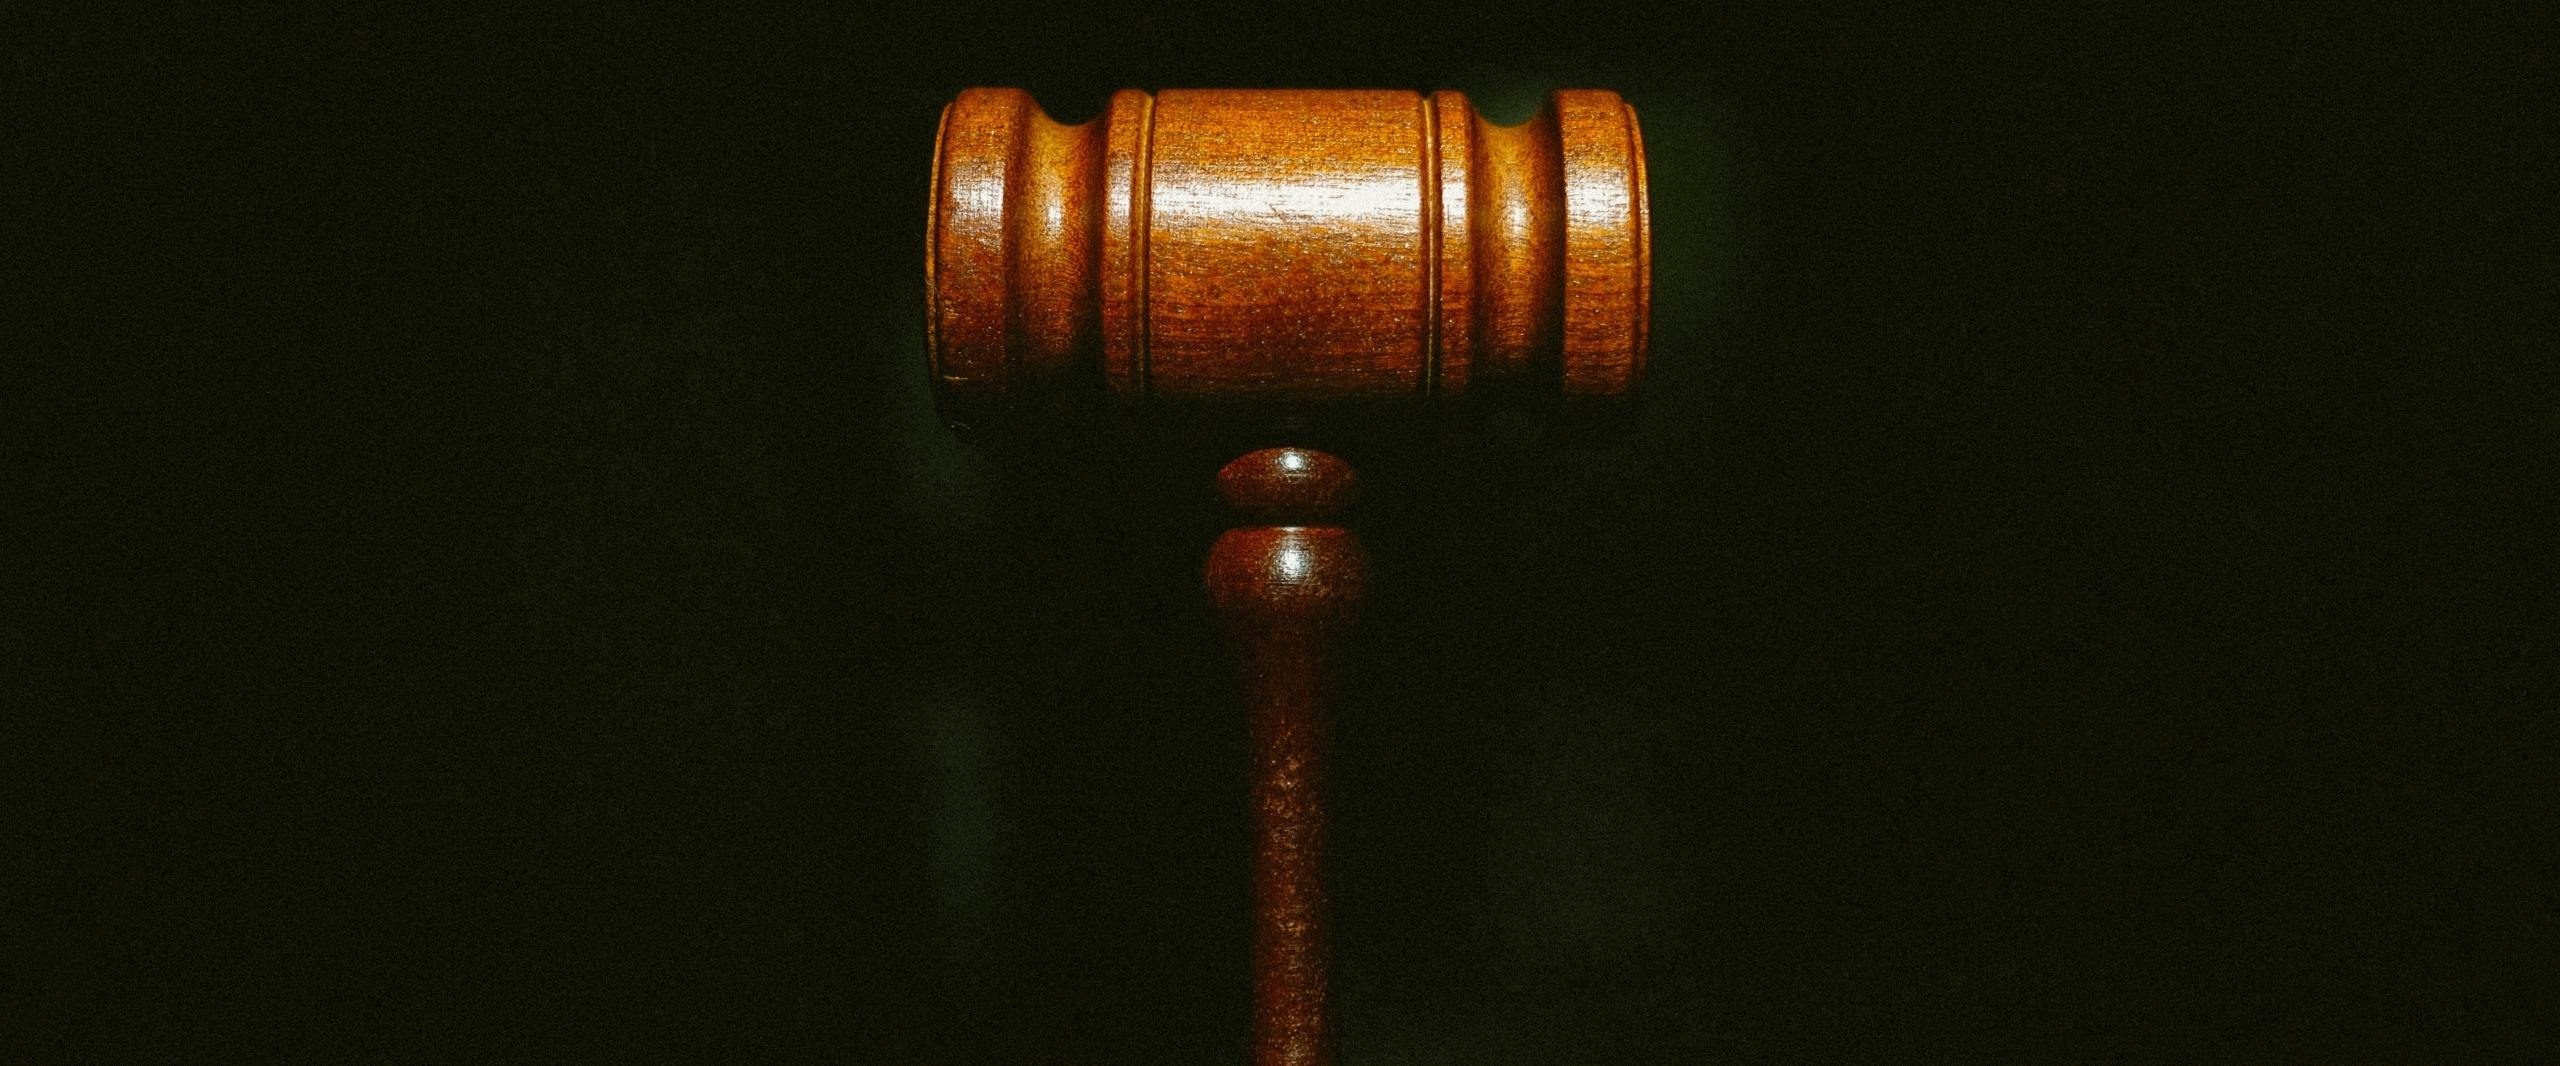 A wooden gavel against a black background.